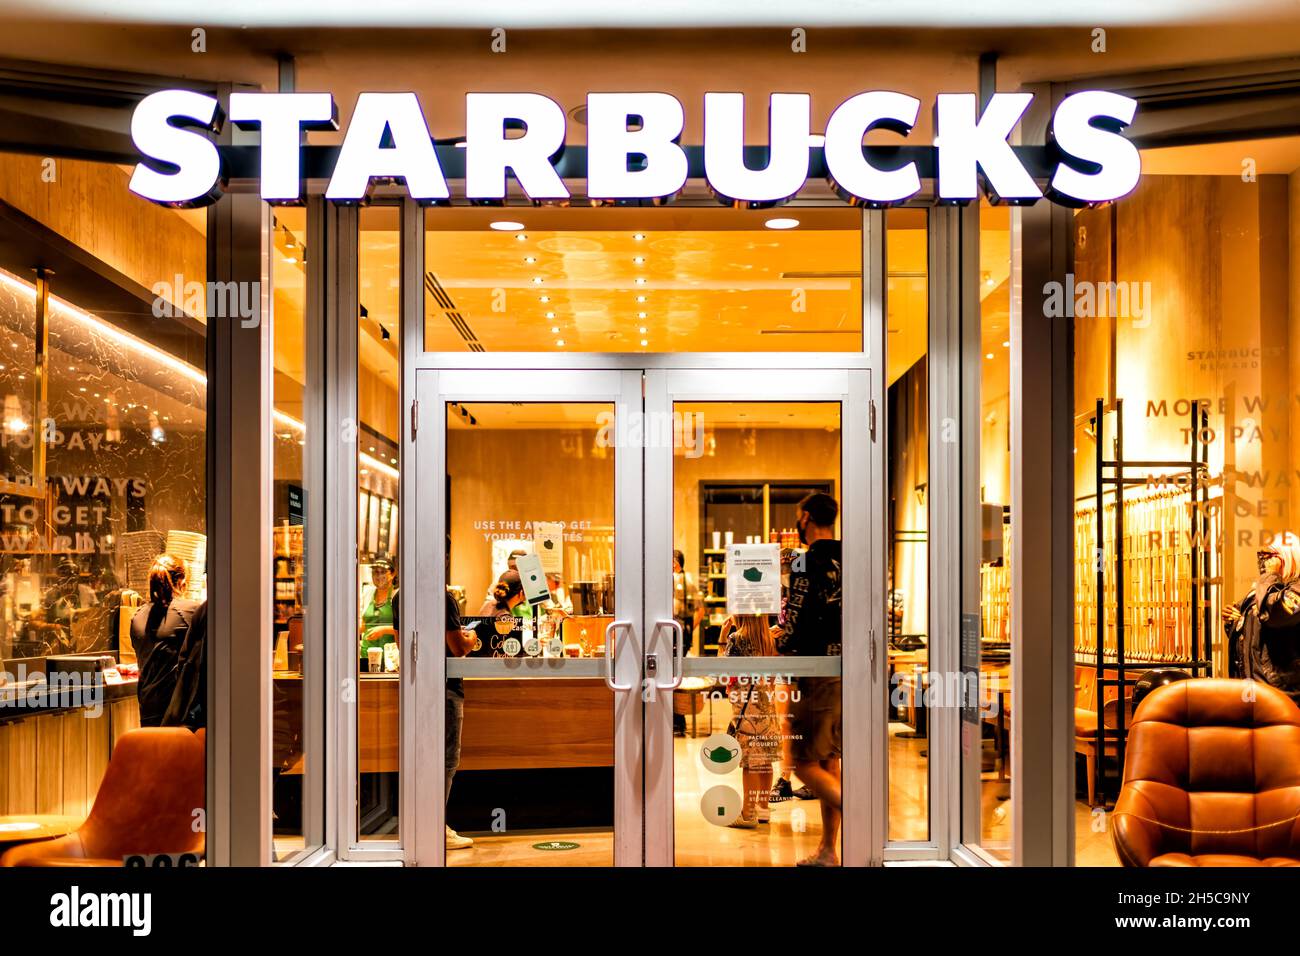 Miami Beach, USA - January 20, 2021: Famous Lincoln road shopping street with sign entrance exterior for Starbucks coffee cafe restaurant store in Flo Stock Photo